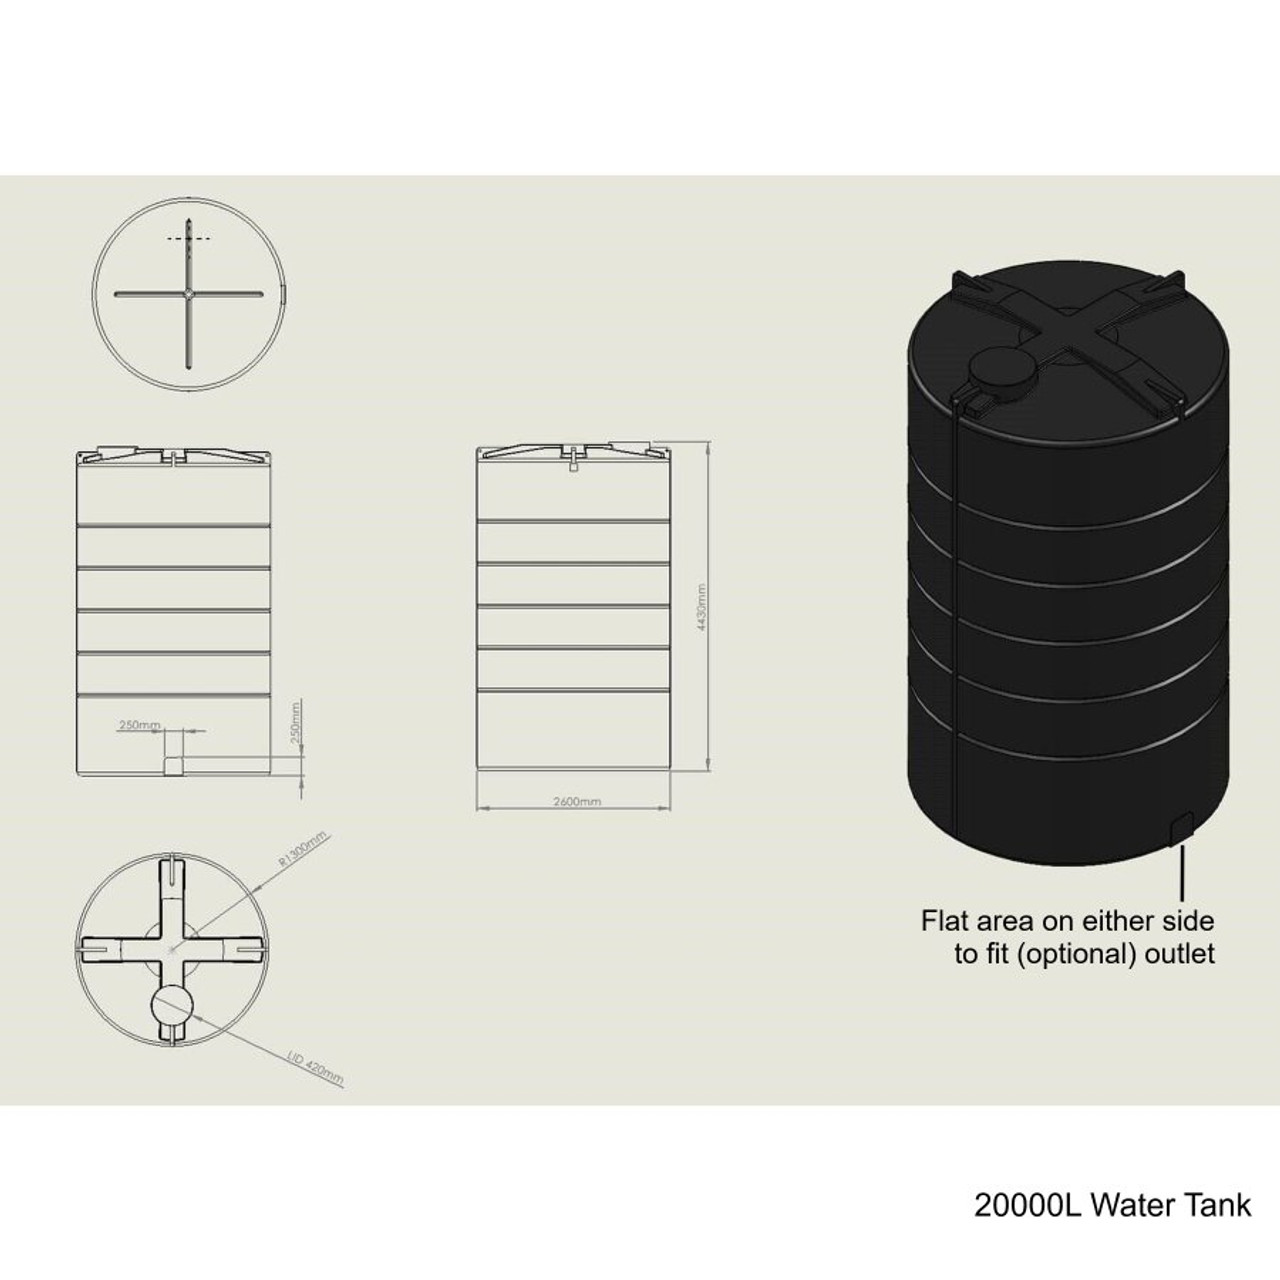 20000L water tank dimensions showing locations of optional outlets.